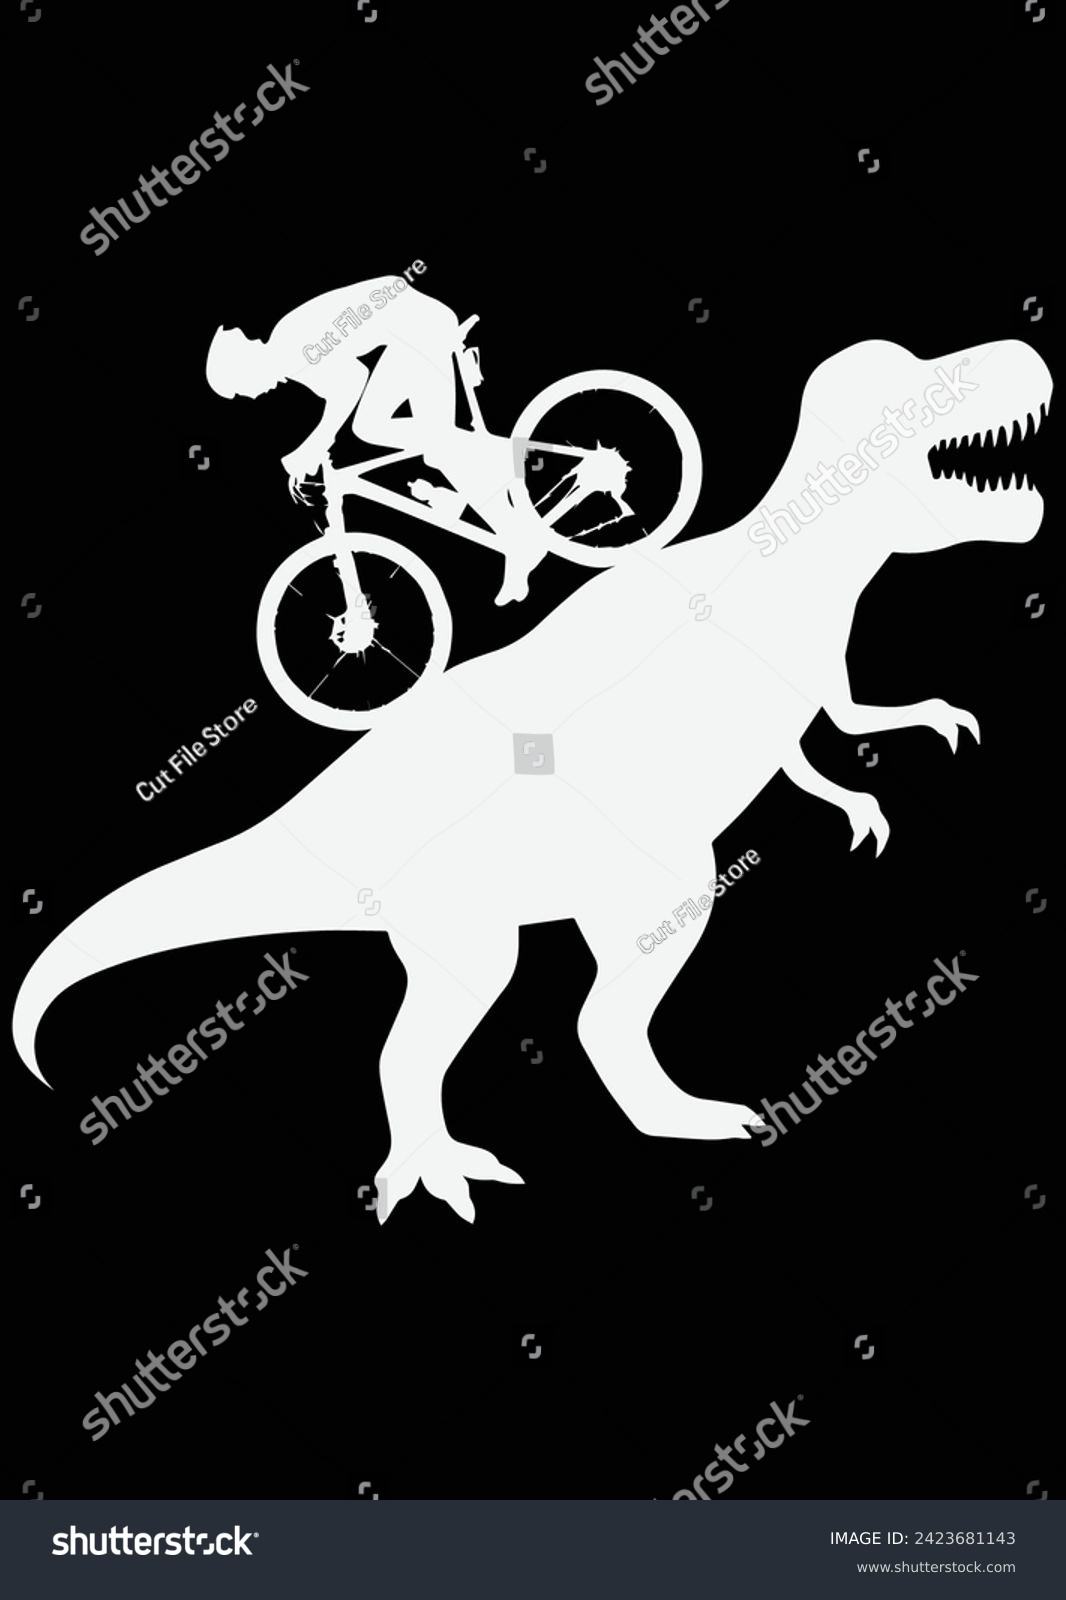 SVG of T-Rex Cycling eps cut file for cutting machine svg